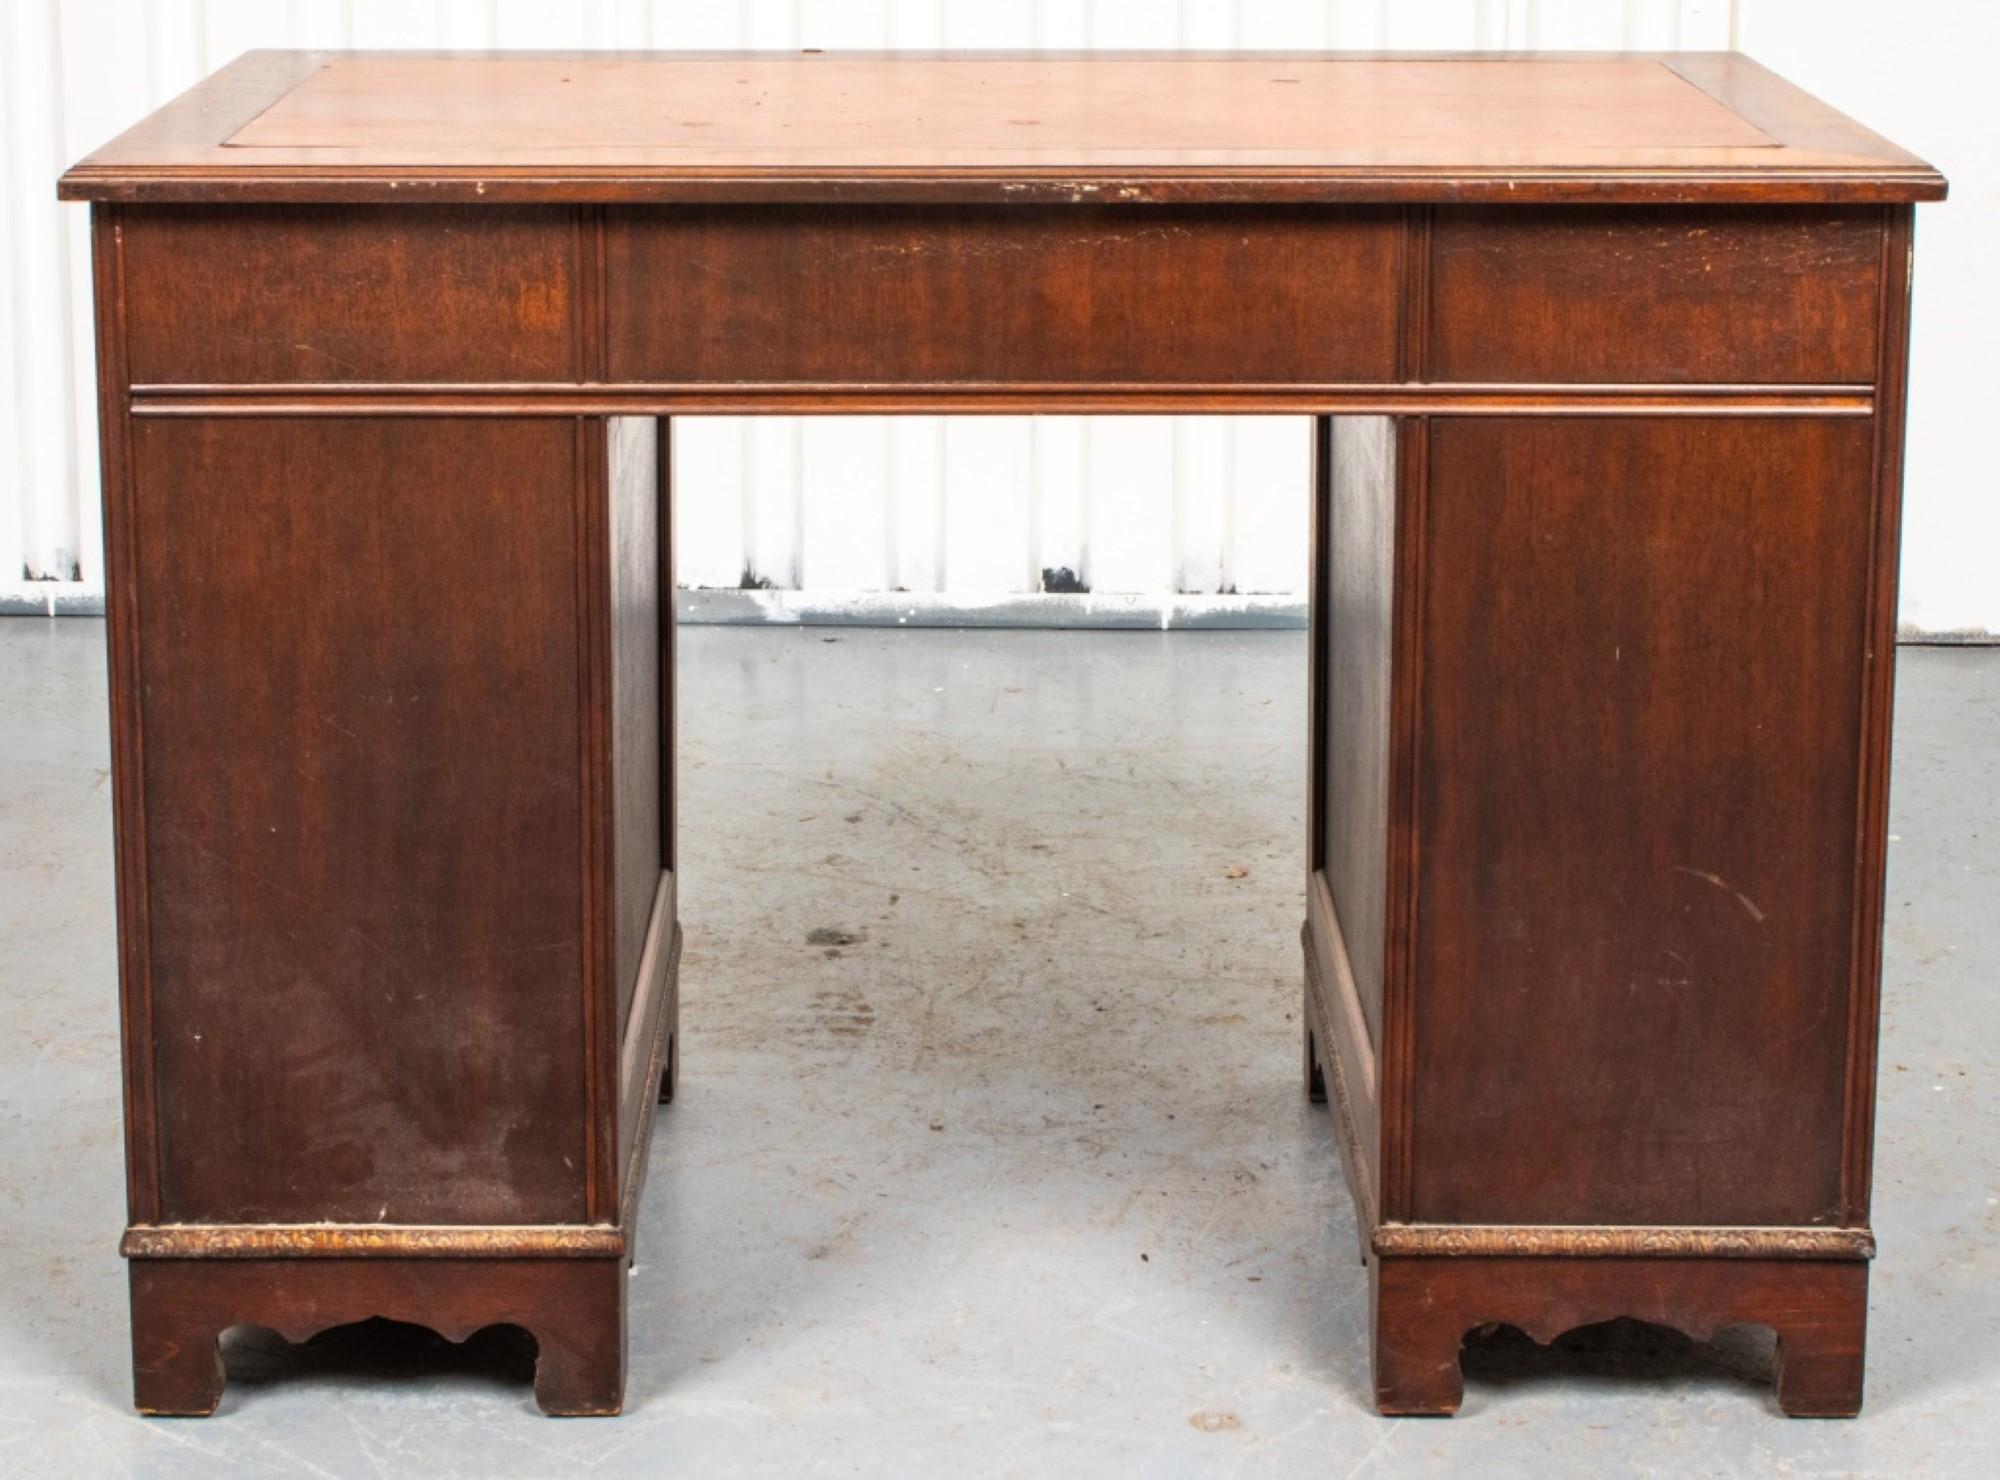 Georgian style mahogany pedestal desk with inset leather top and nine drawers raised on ogee bracket feet.

Dealer: S138XX